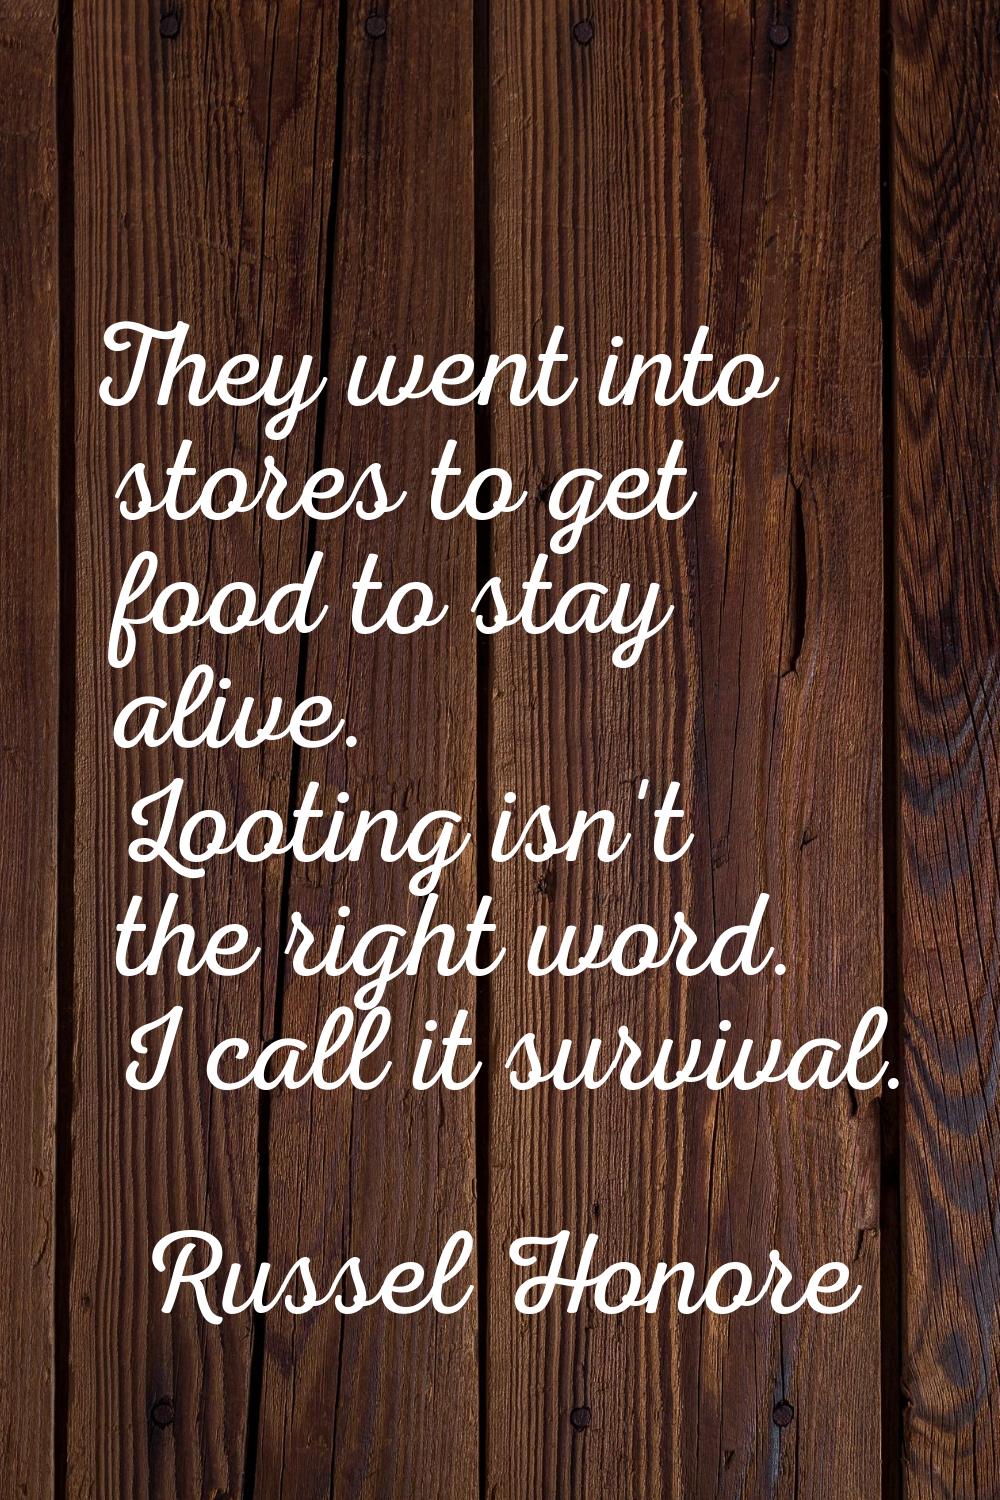 They went into stores to get food to stay alive. Looting isn't the right word. I call it survival.